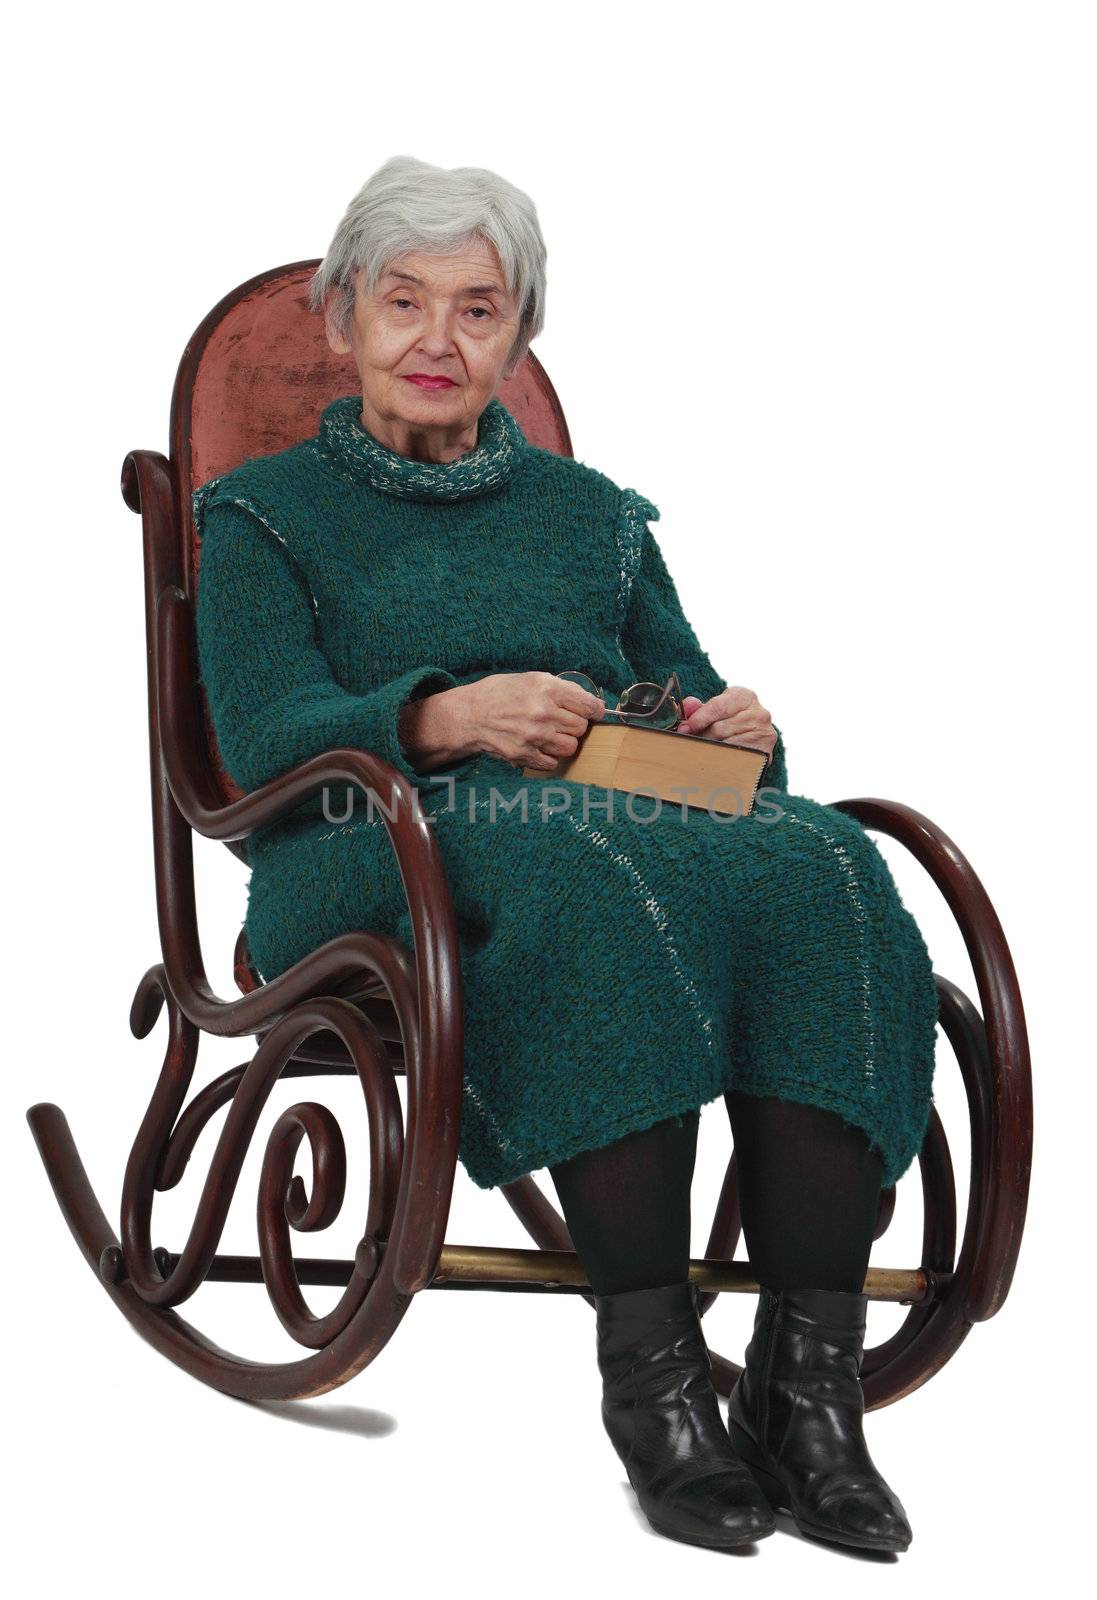 Image of an old woman sitting on a rocker with a closed book in her lap.